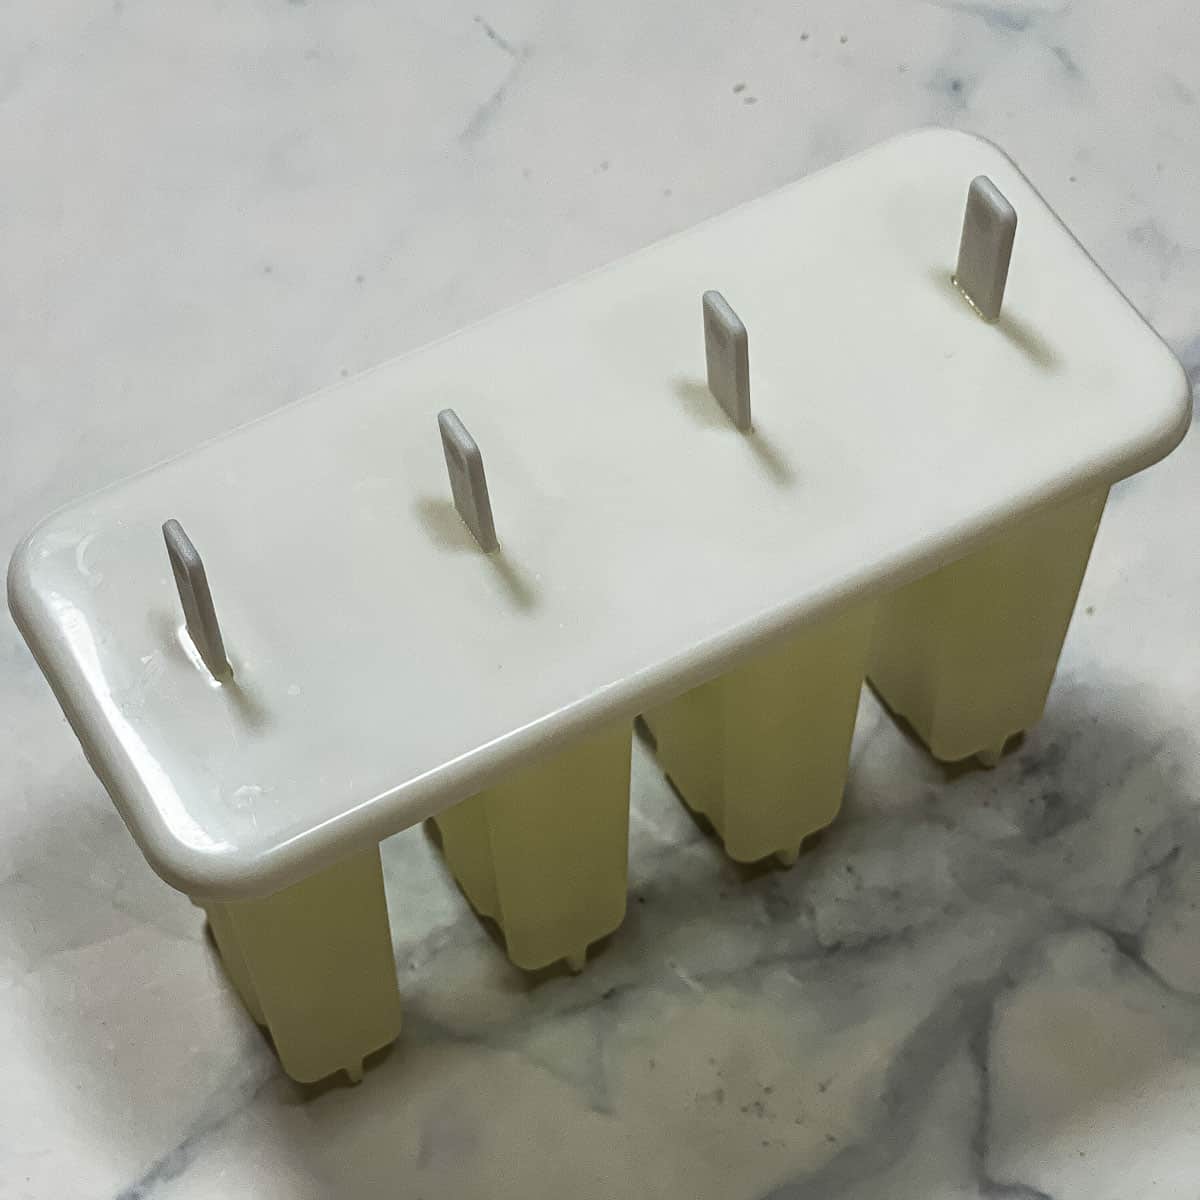 A popsicle mold with the lid and sticks on